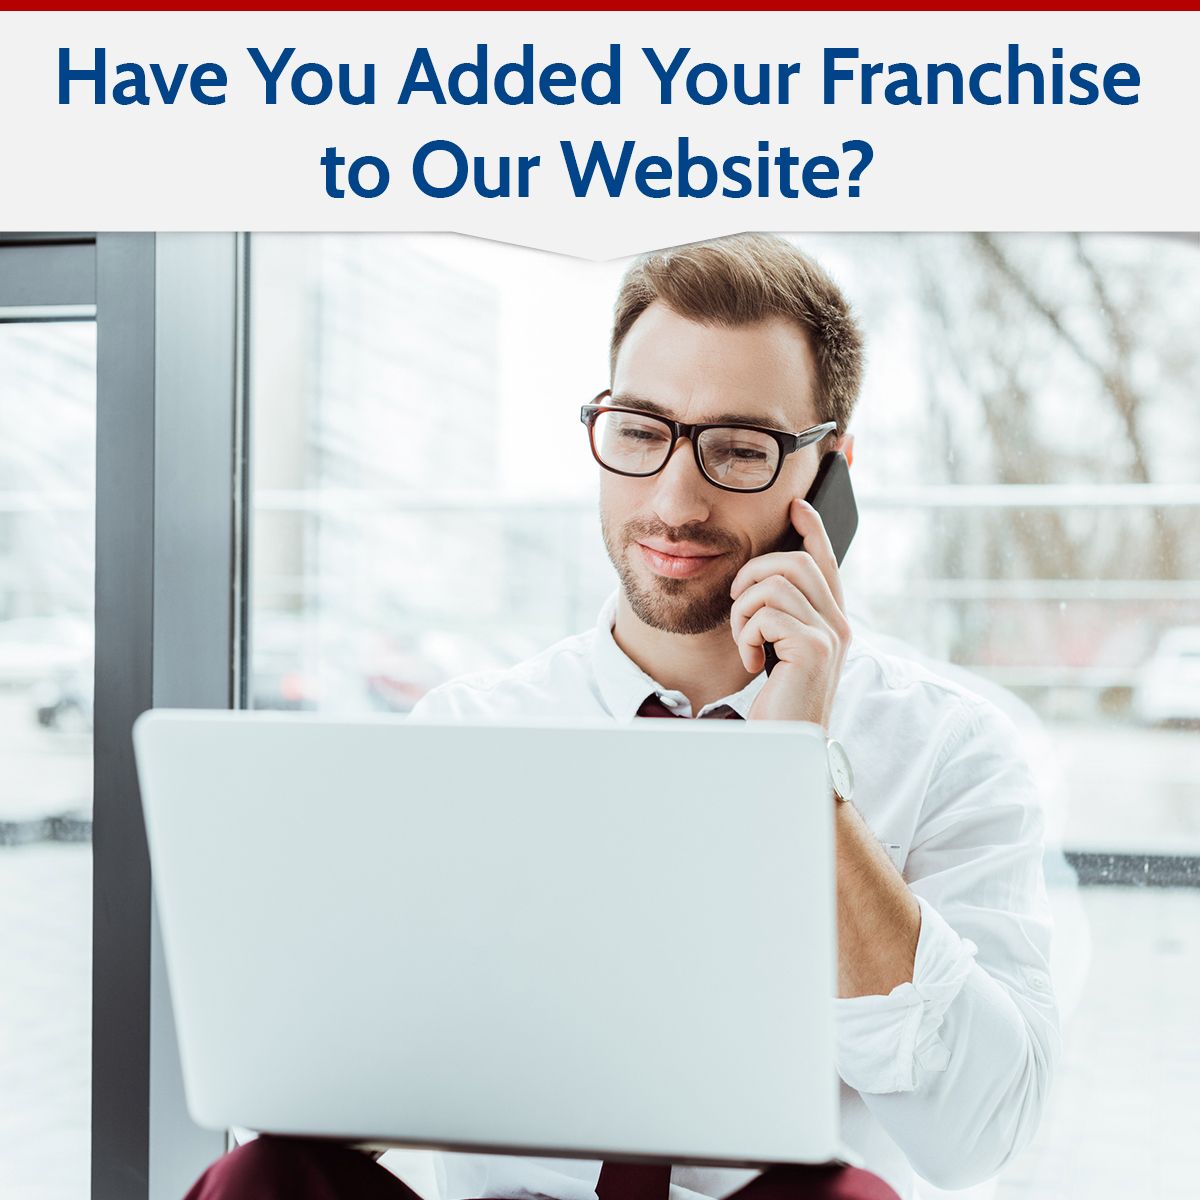 Have You Added Your Franchise to Our Website?